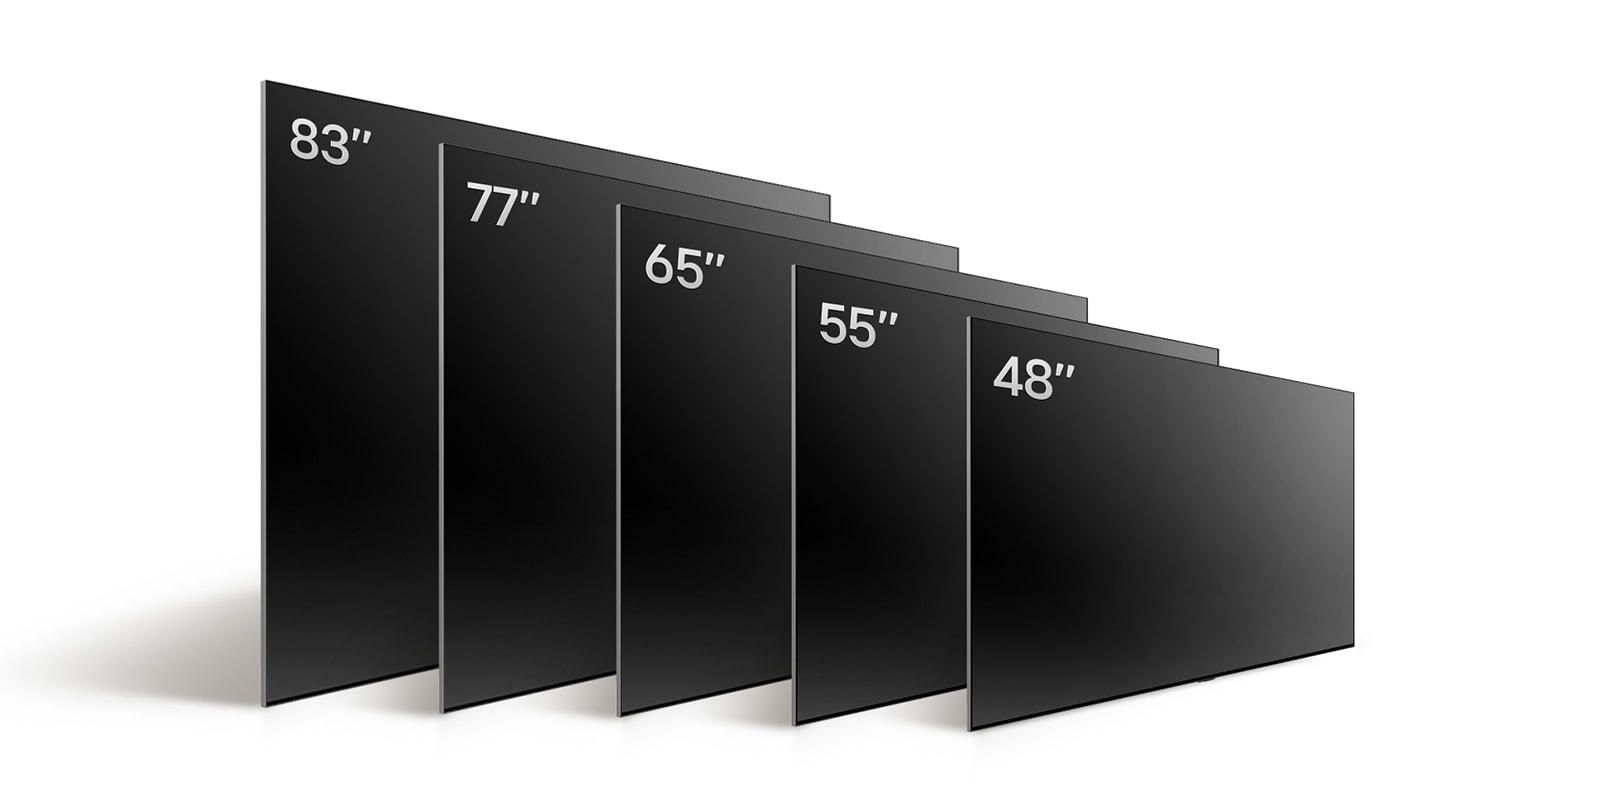 An image comparing LG OLED C4's varying sizes, showing 48", 55", 65", 77", and 83".